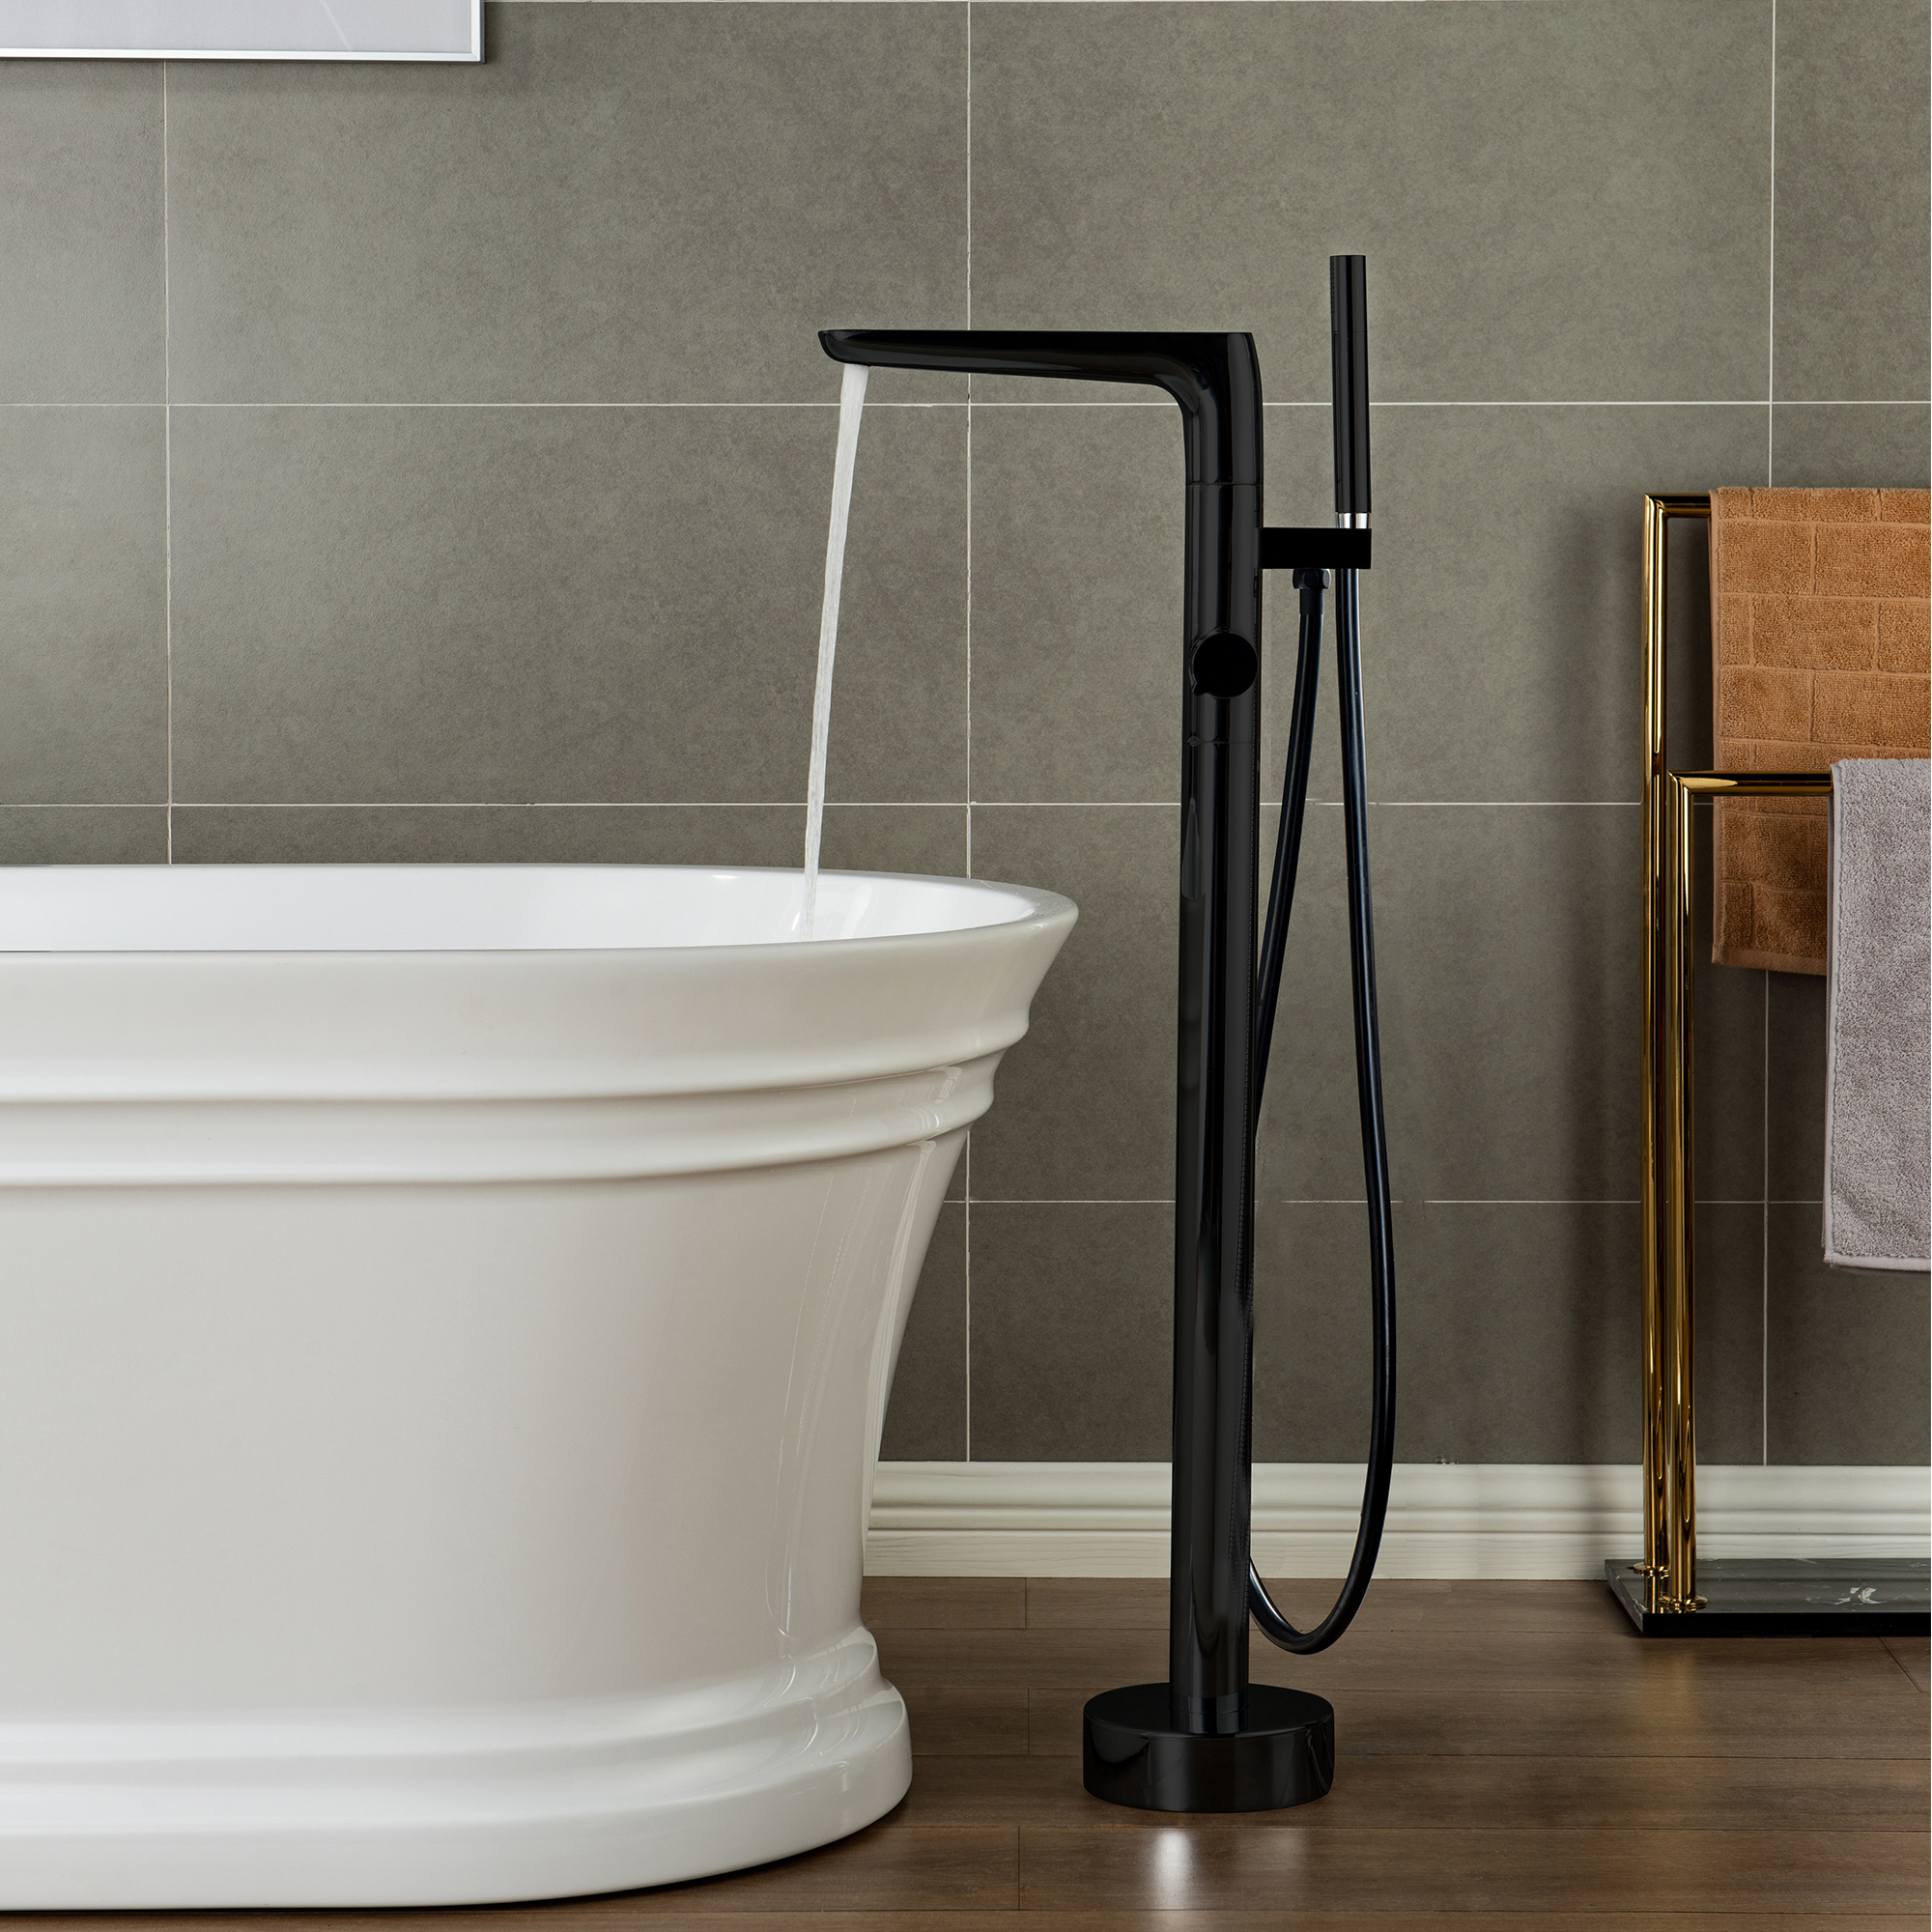  WOODBRIDGE F0015BL Contemporary Single Handle Floor Mount Freestanding Tub Filler Faucet with Hand shower in Matte Black Finish._12702